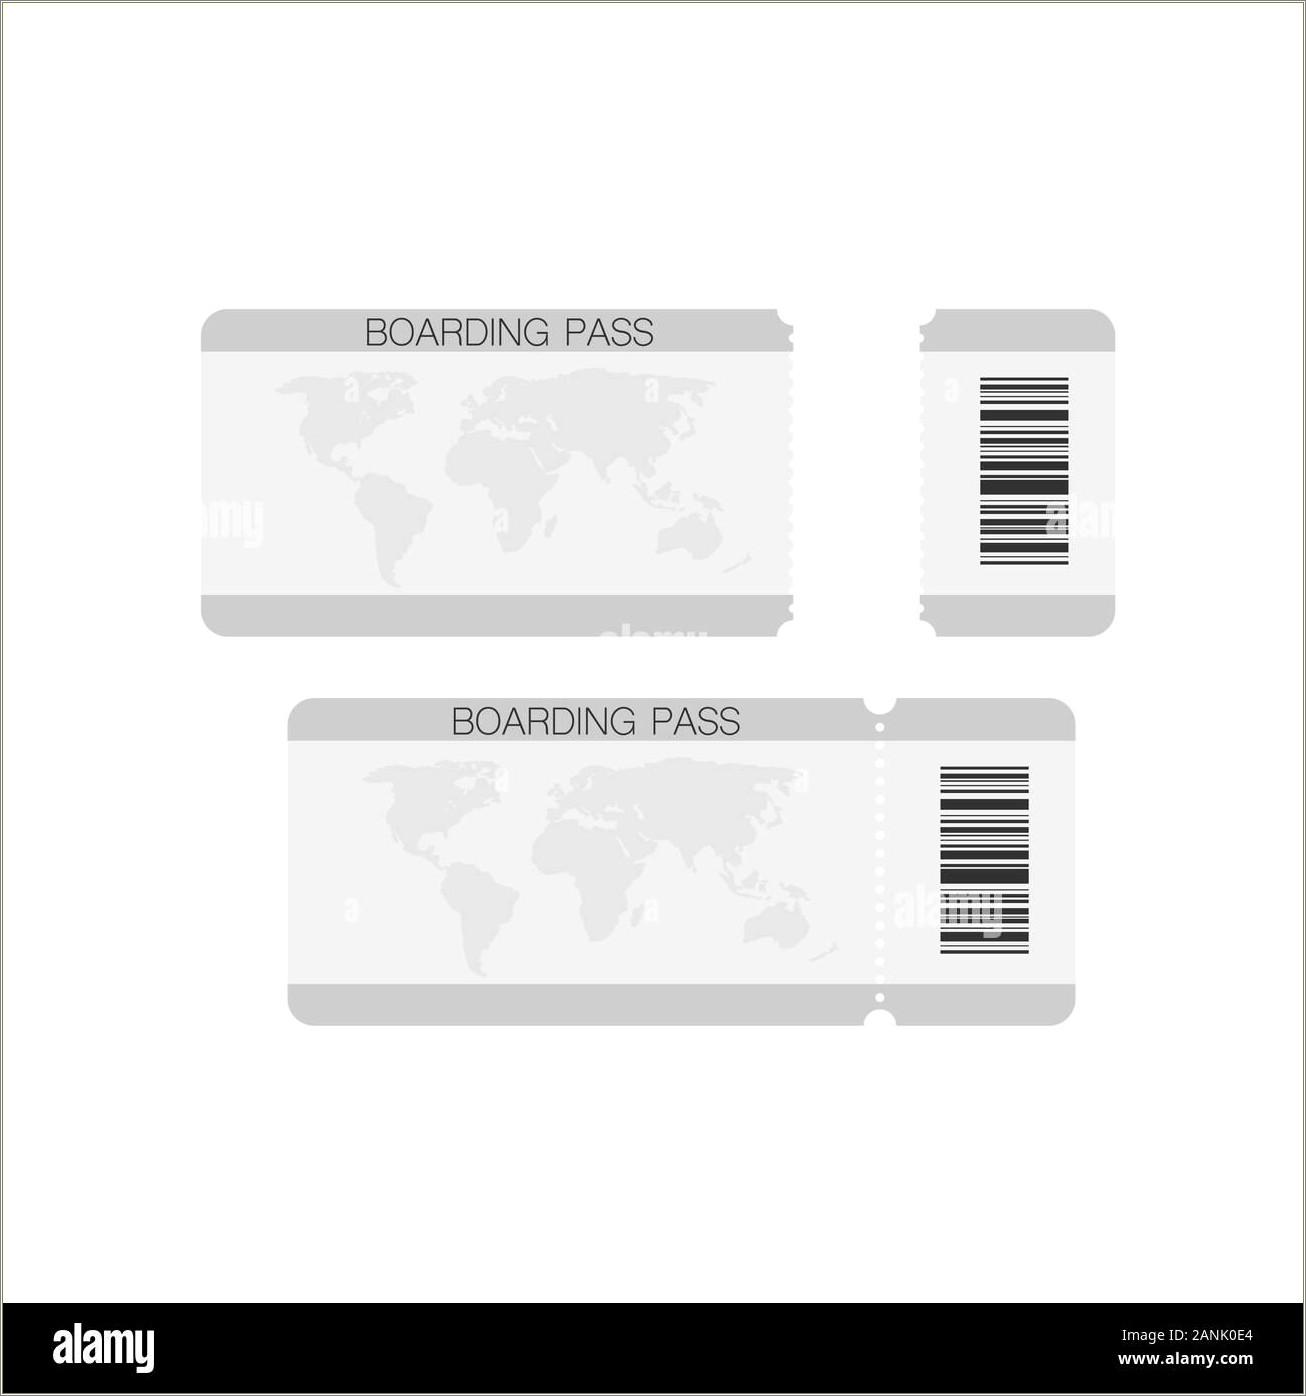 Free Ticket With Bar Code Invitation Template